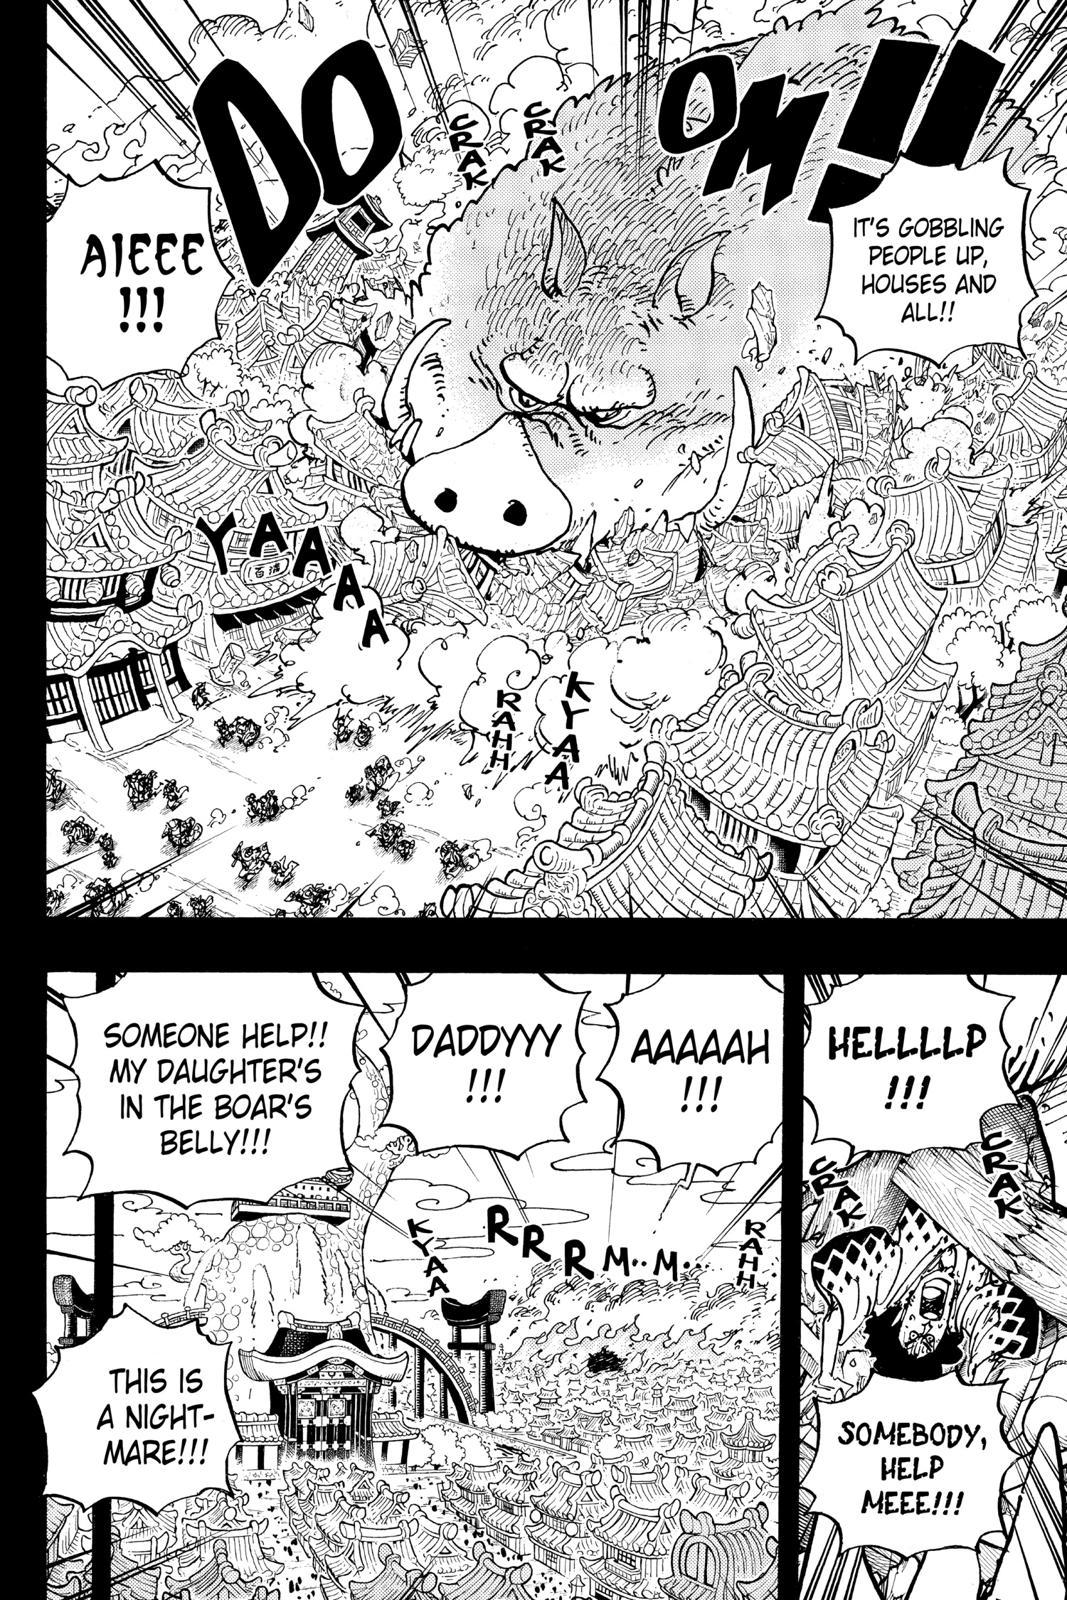 One Piece Chapter 961 One Piece Manga Online